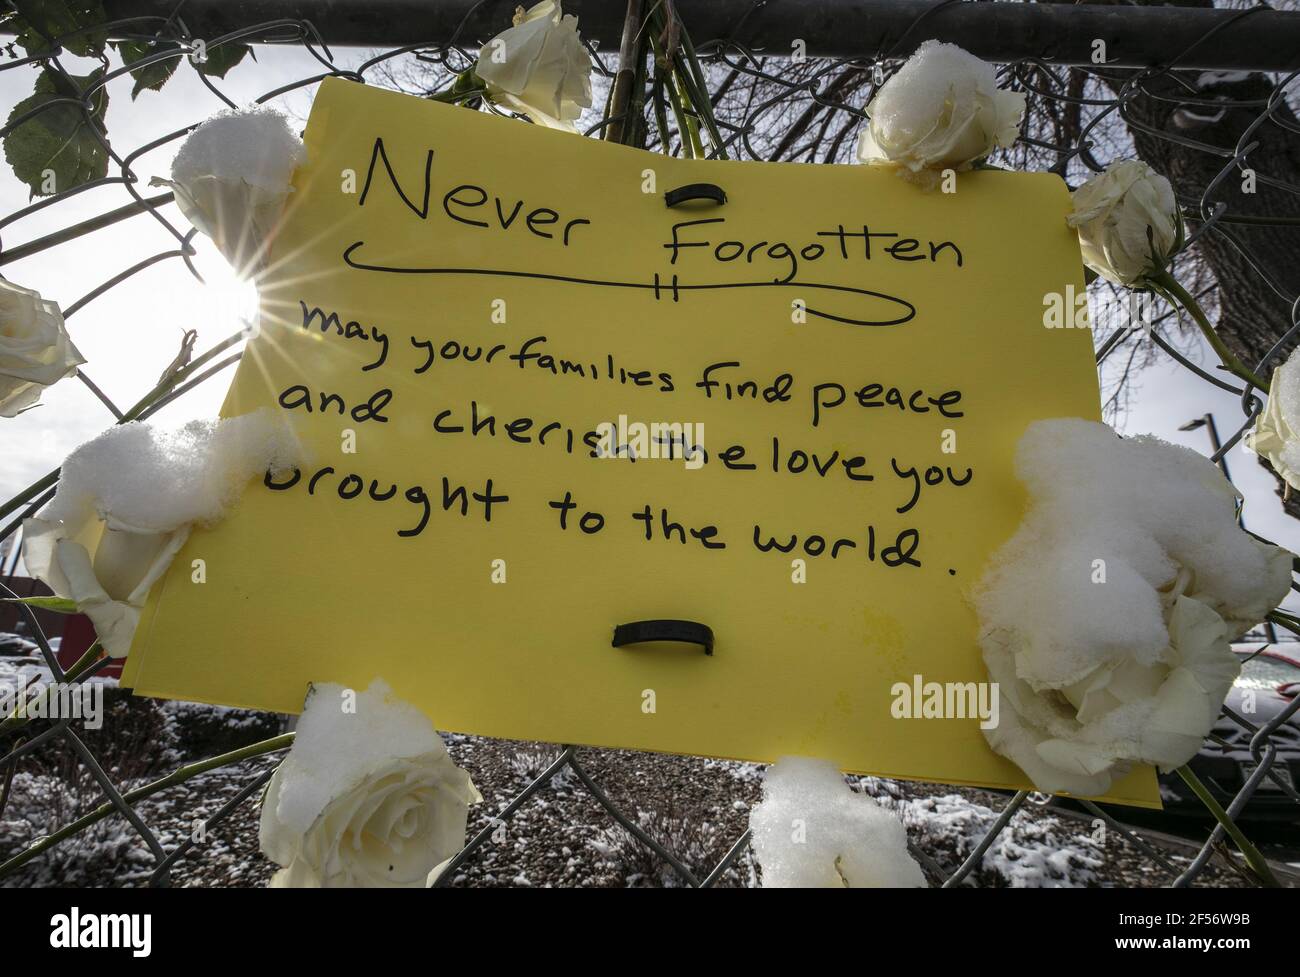 Boulder, United States. 24th Mar, 2021. Snow-covered roses ring a note placed outside the King Soopers grocery store after a Monday shooting there killed 10 people, including police officer Eric Talley, in Boulder, Colorado, on Wednesday, March 24, 2021. Police said the suspect, identified as Ahmad Al Aliwi Alissa, was in custody and had been charged with 10 counts of first degree murder. Photo by Bob Strong/UPI Credit: UPI/Alamy Live News Stock Photo